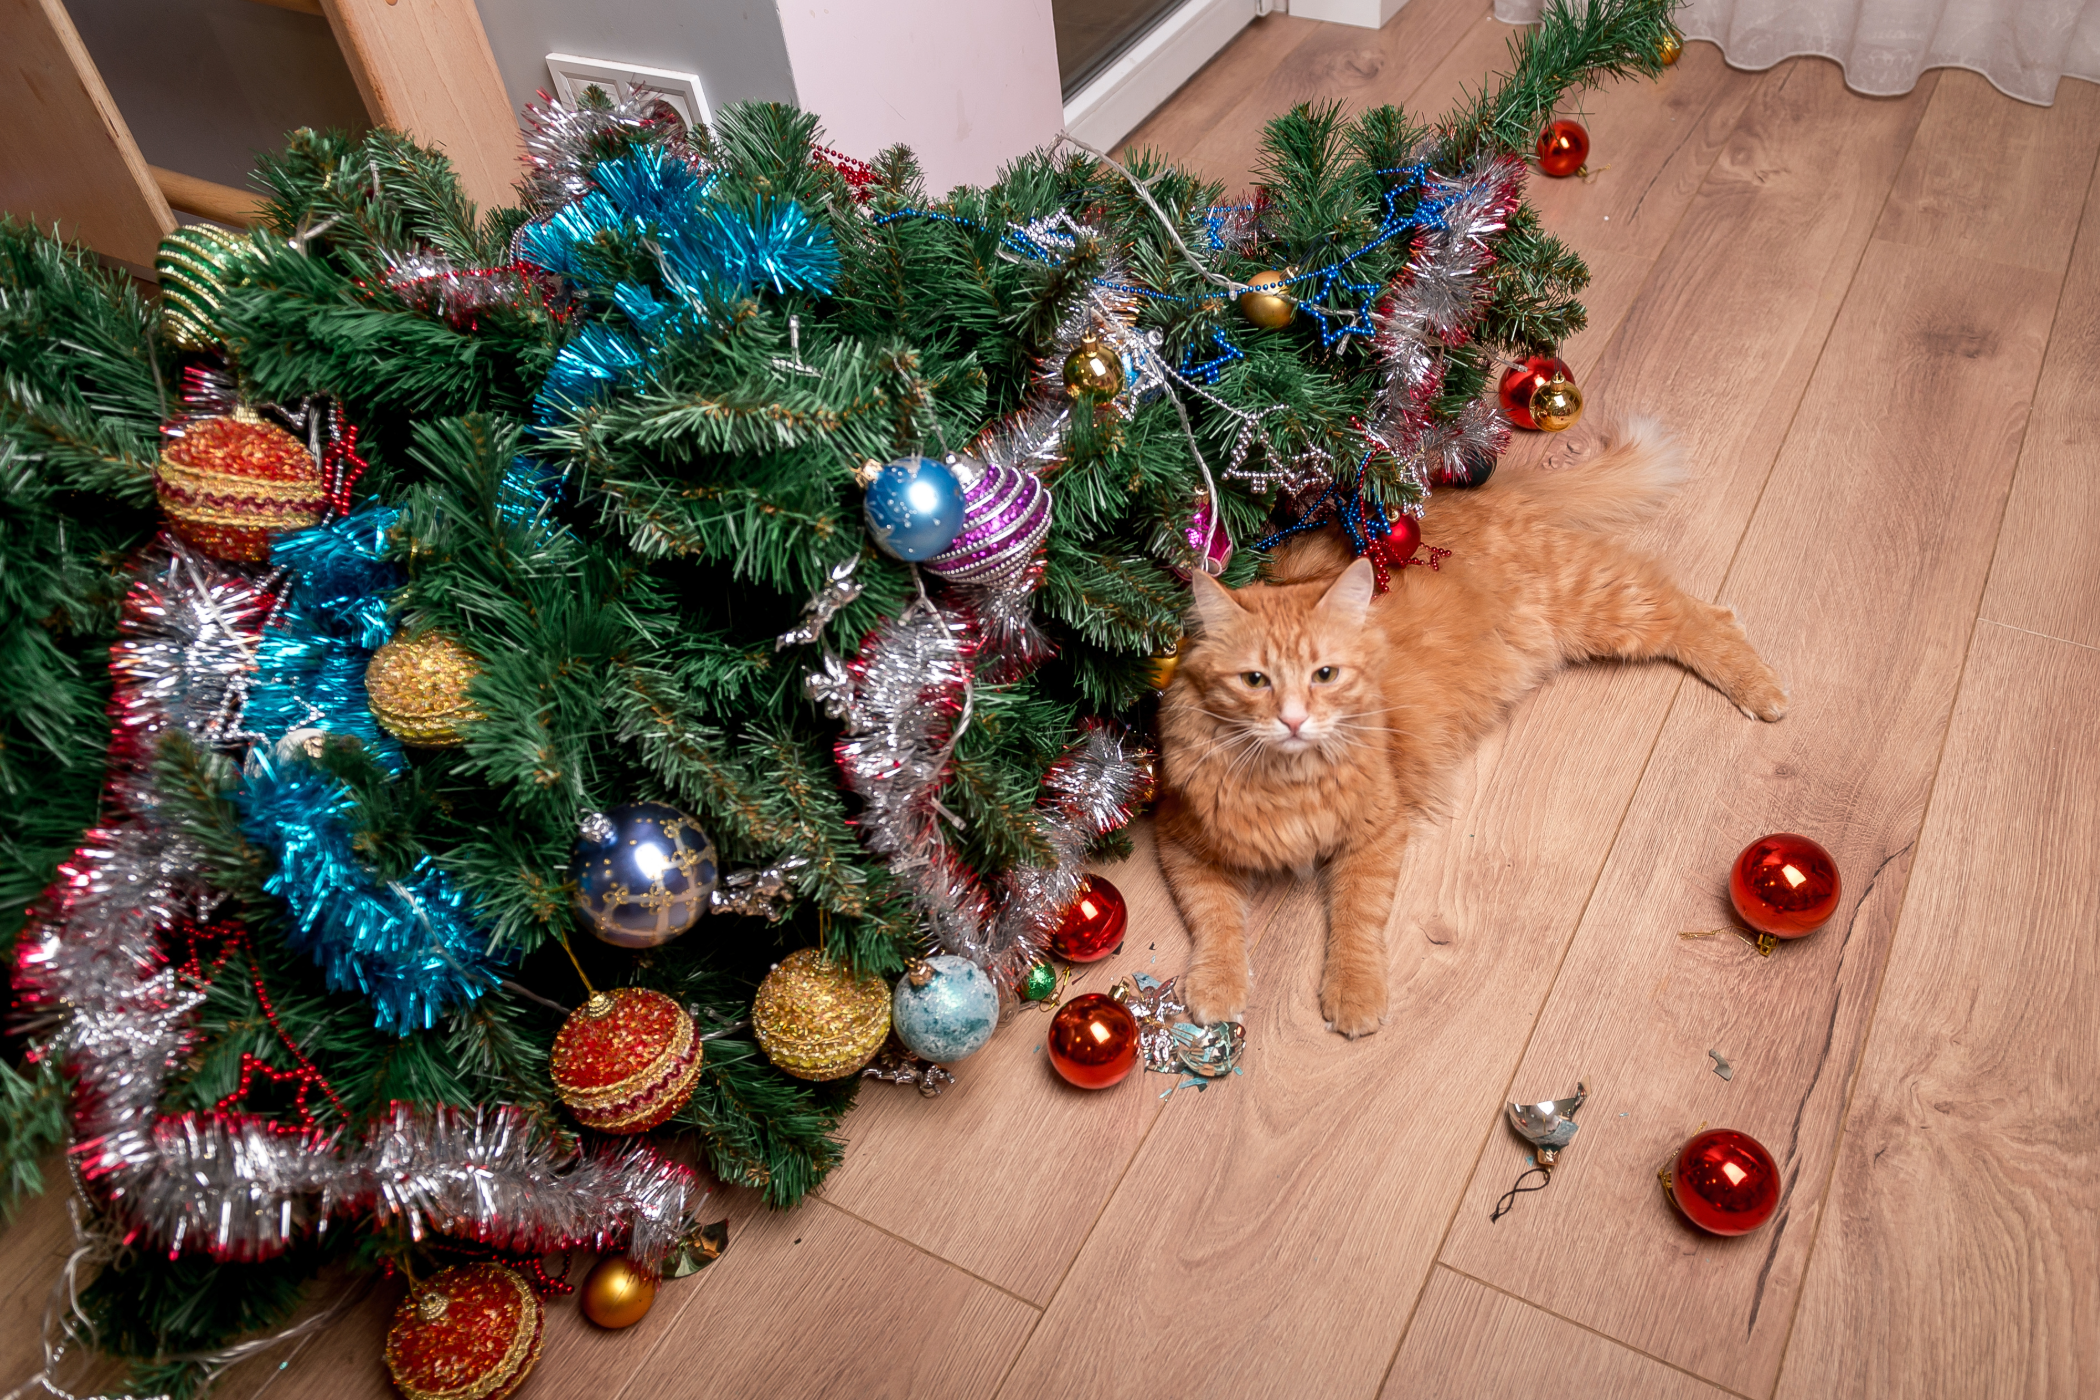 A cat not looking guilty while sitting next to a fallen Christmas tree.